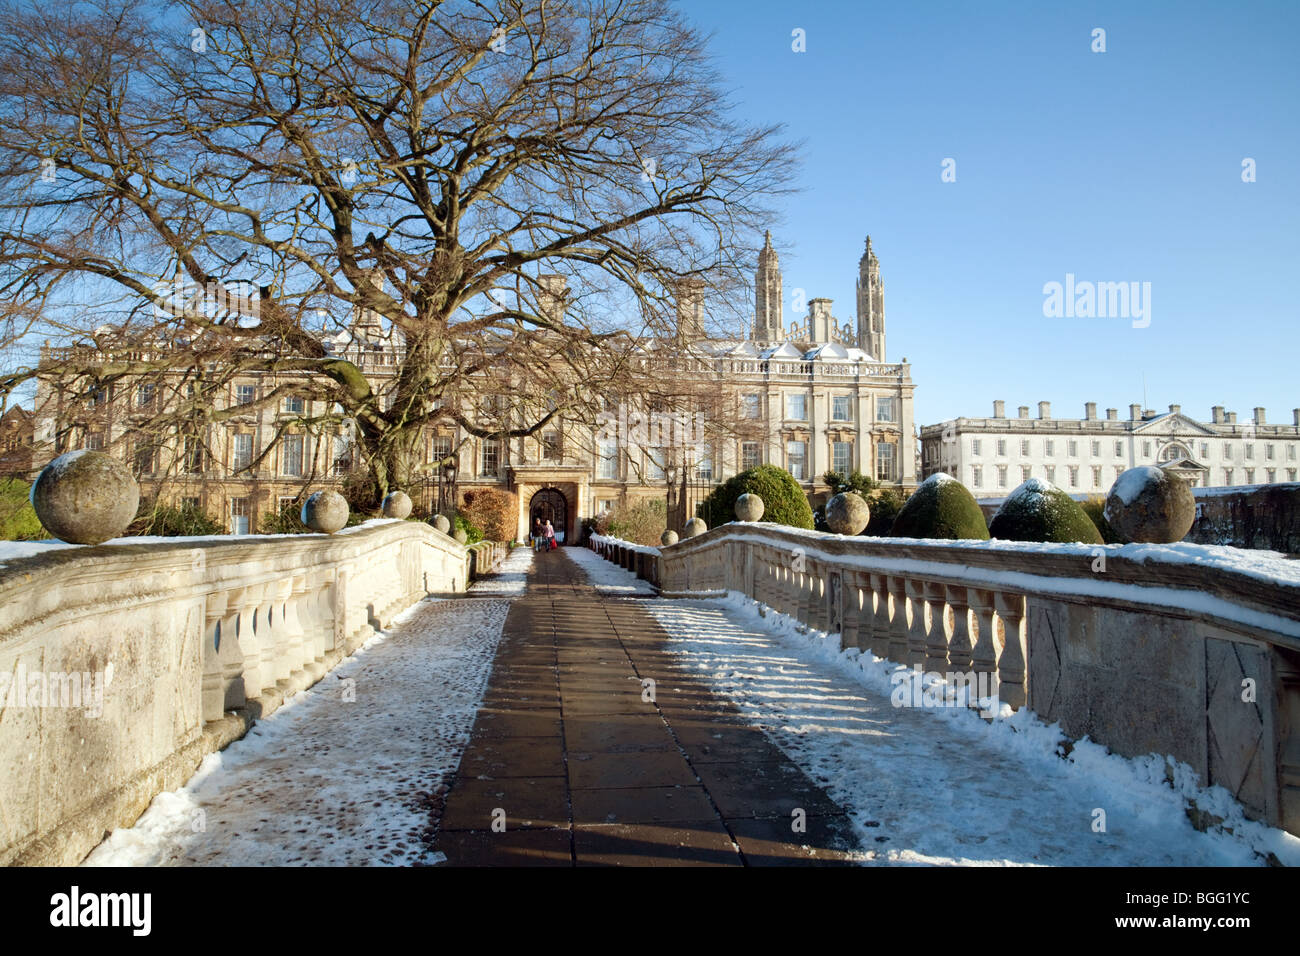 Clare College, Cambridge University as seen from Clare Bridge, in the snow Stock Photo